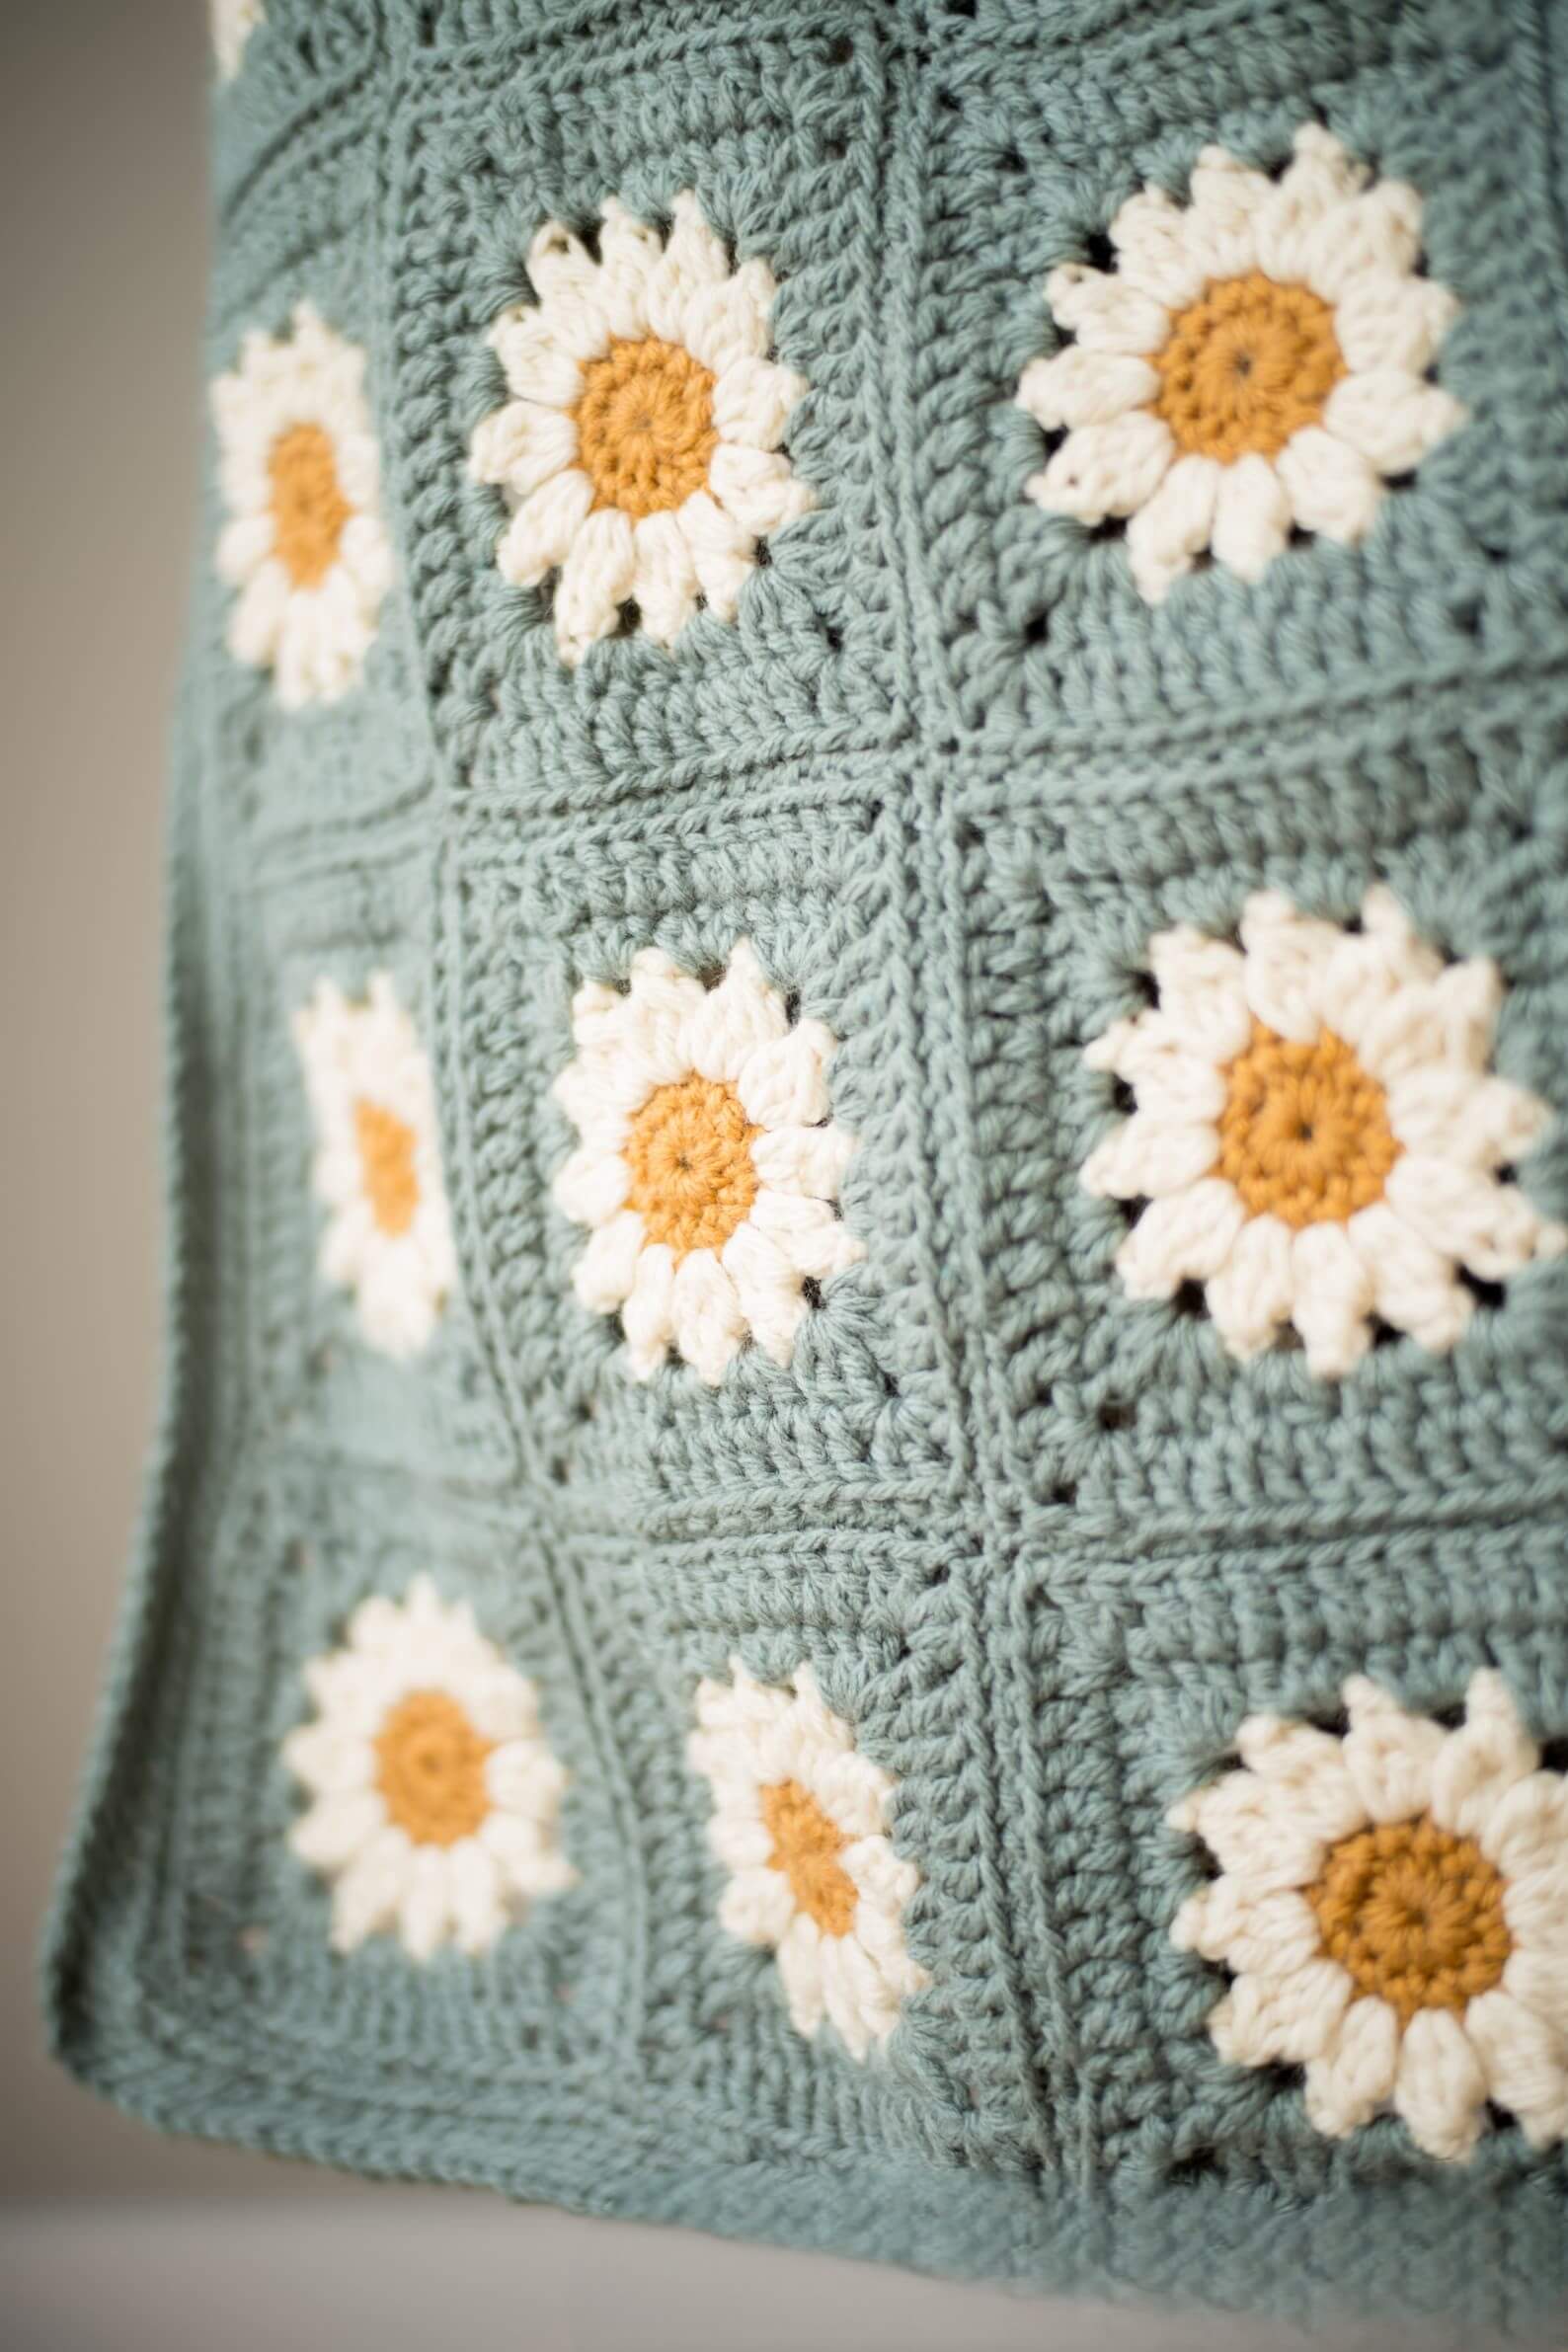 Chunky Braided Cabled Blanket Crochet Pattern – IKCrochet